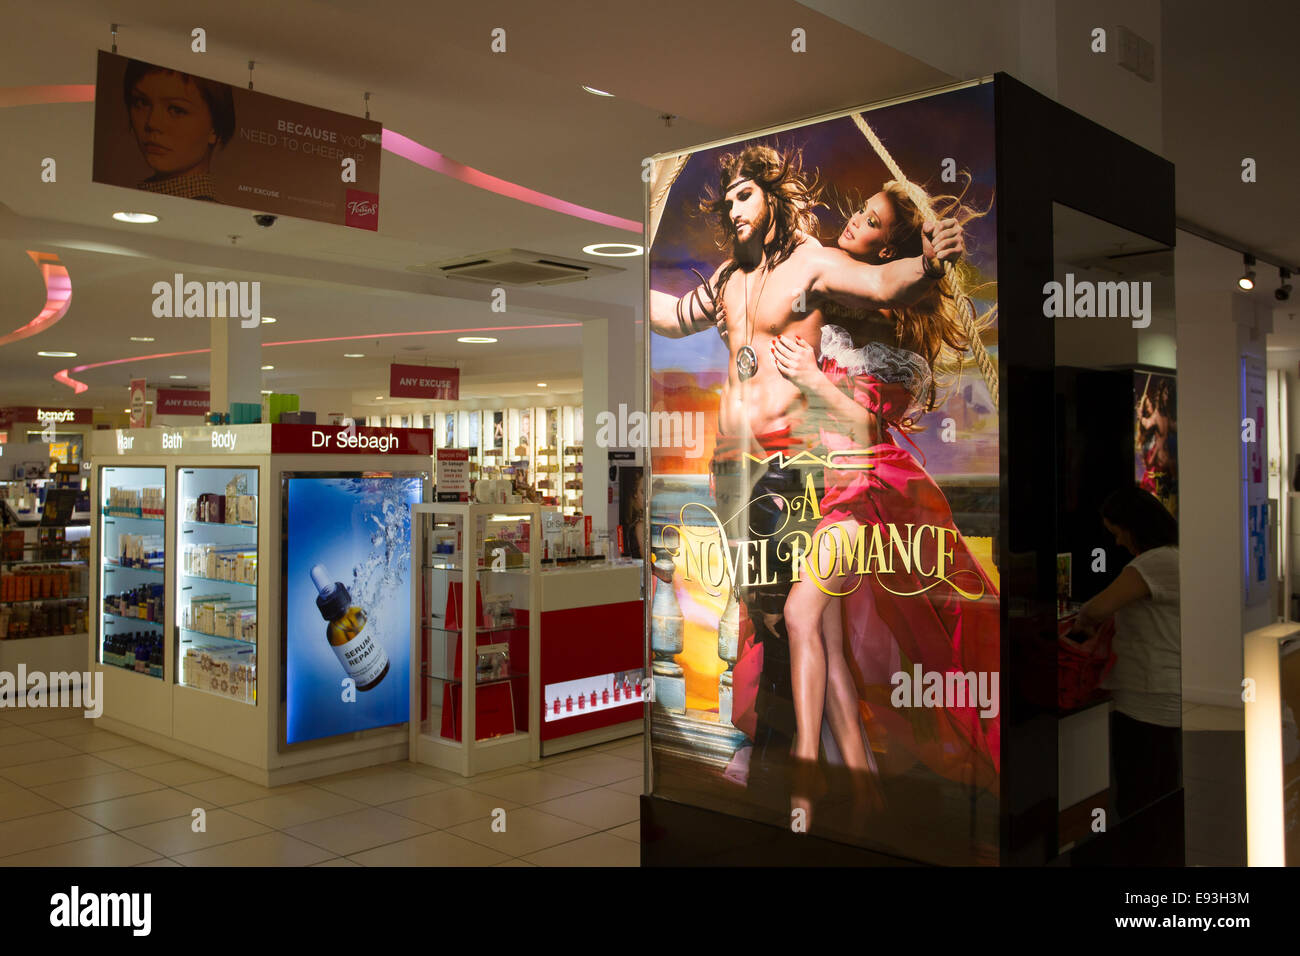 a novel romance by Mac display and advertisement in store Stock Photo